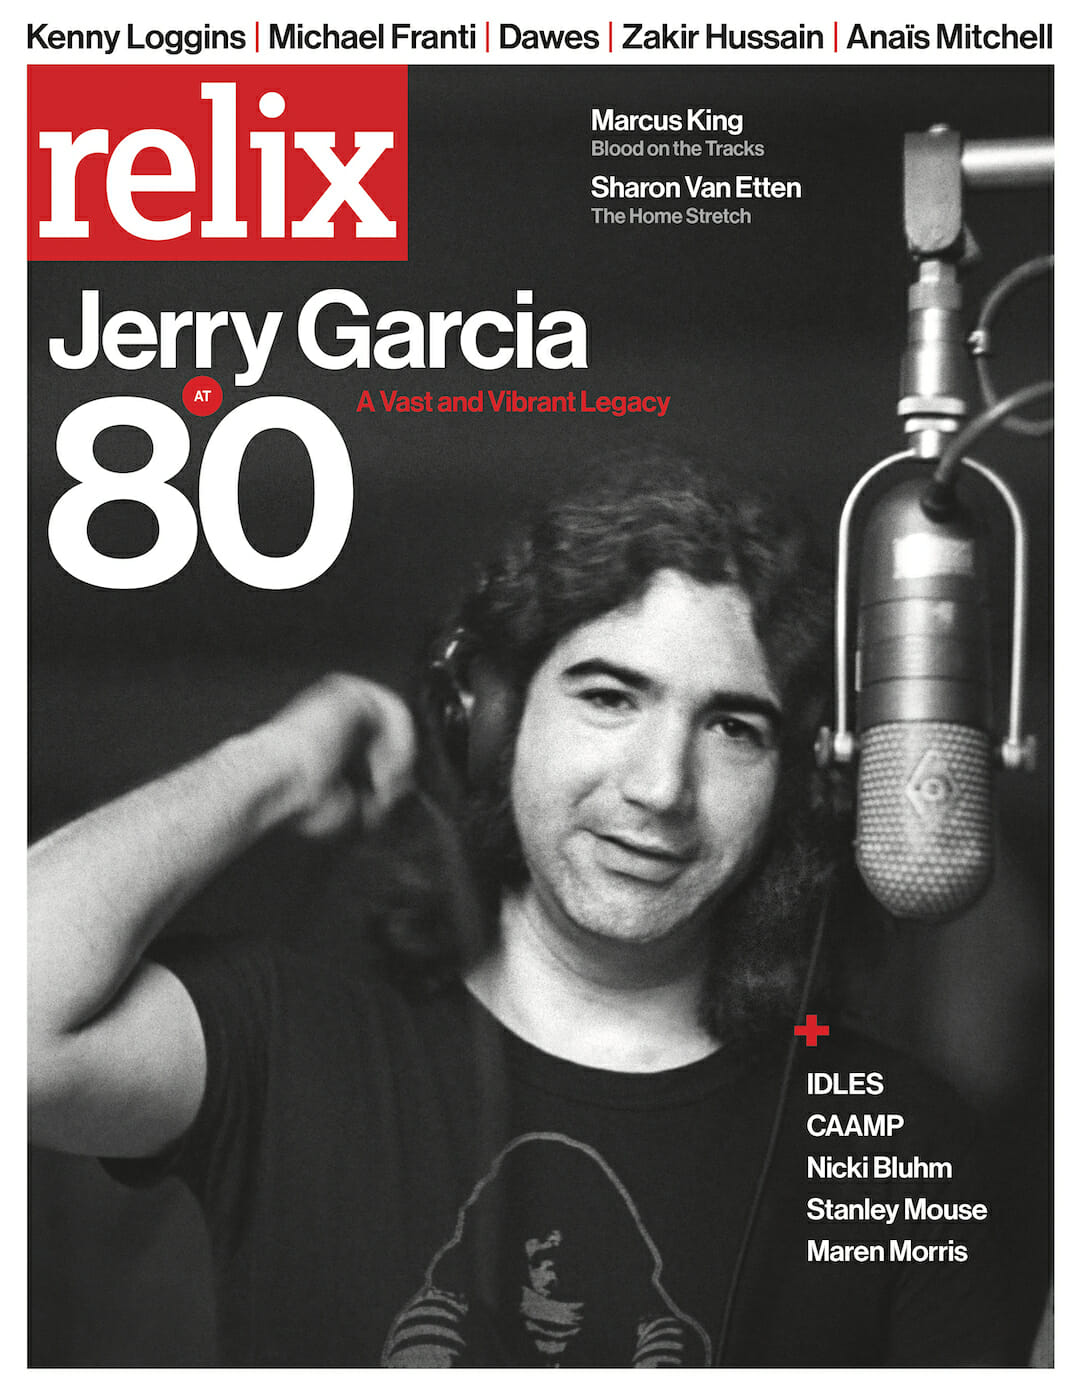 Relix Honors Jerry Garcia’s 80th with July/August Issue and Accompanying Limited Edition T-Shirt